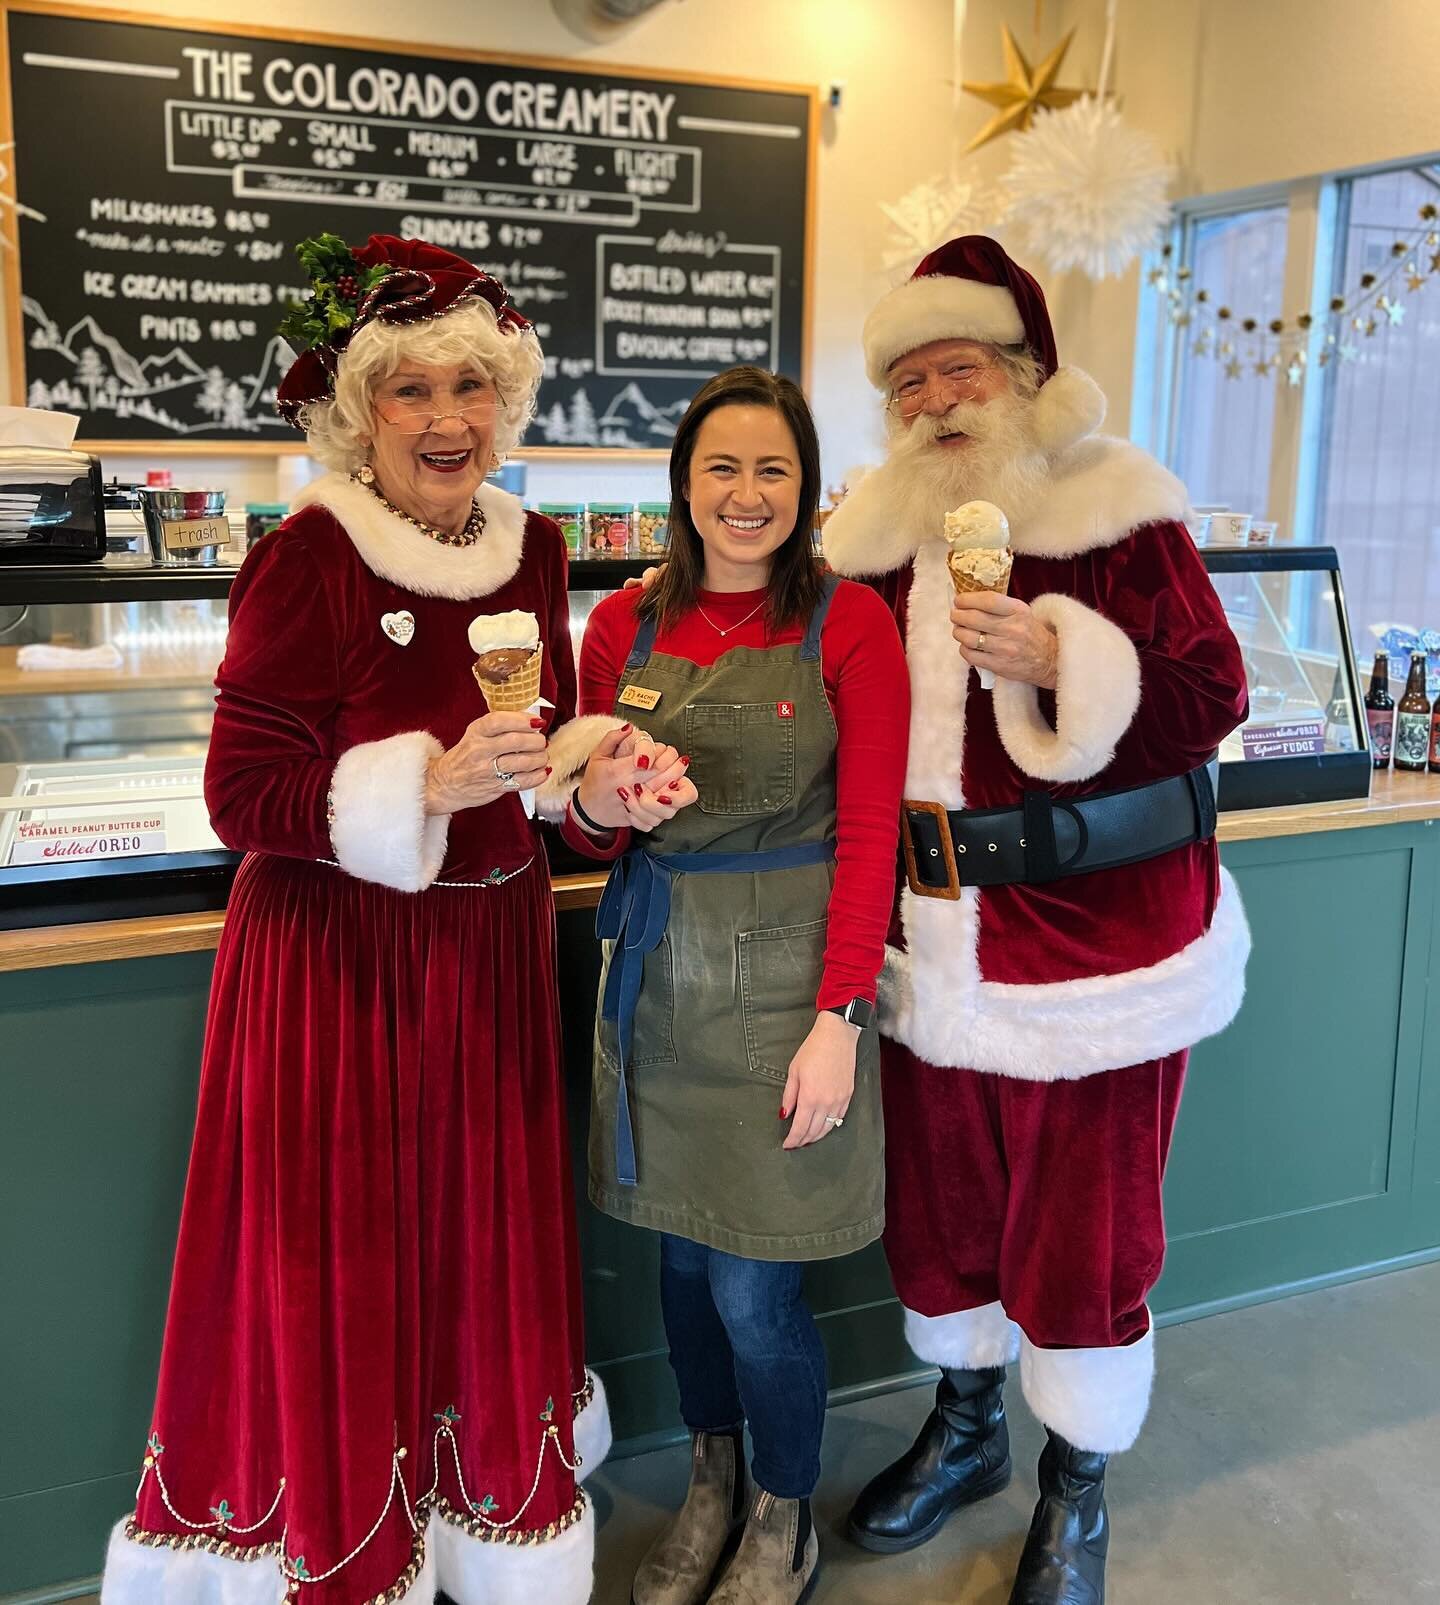 Santa + Mrs. Claus brought some Christmas magic to our shop yesterday! ✨ We are so thankful to everyone for bringing their kids out to enjoy a festive afternoon of fun!

Holiday flavors are going fast! Stop by to grab a scoop or a pint of your favori